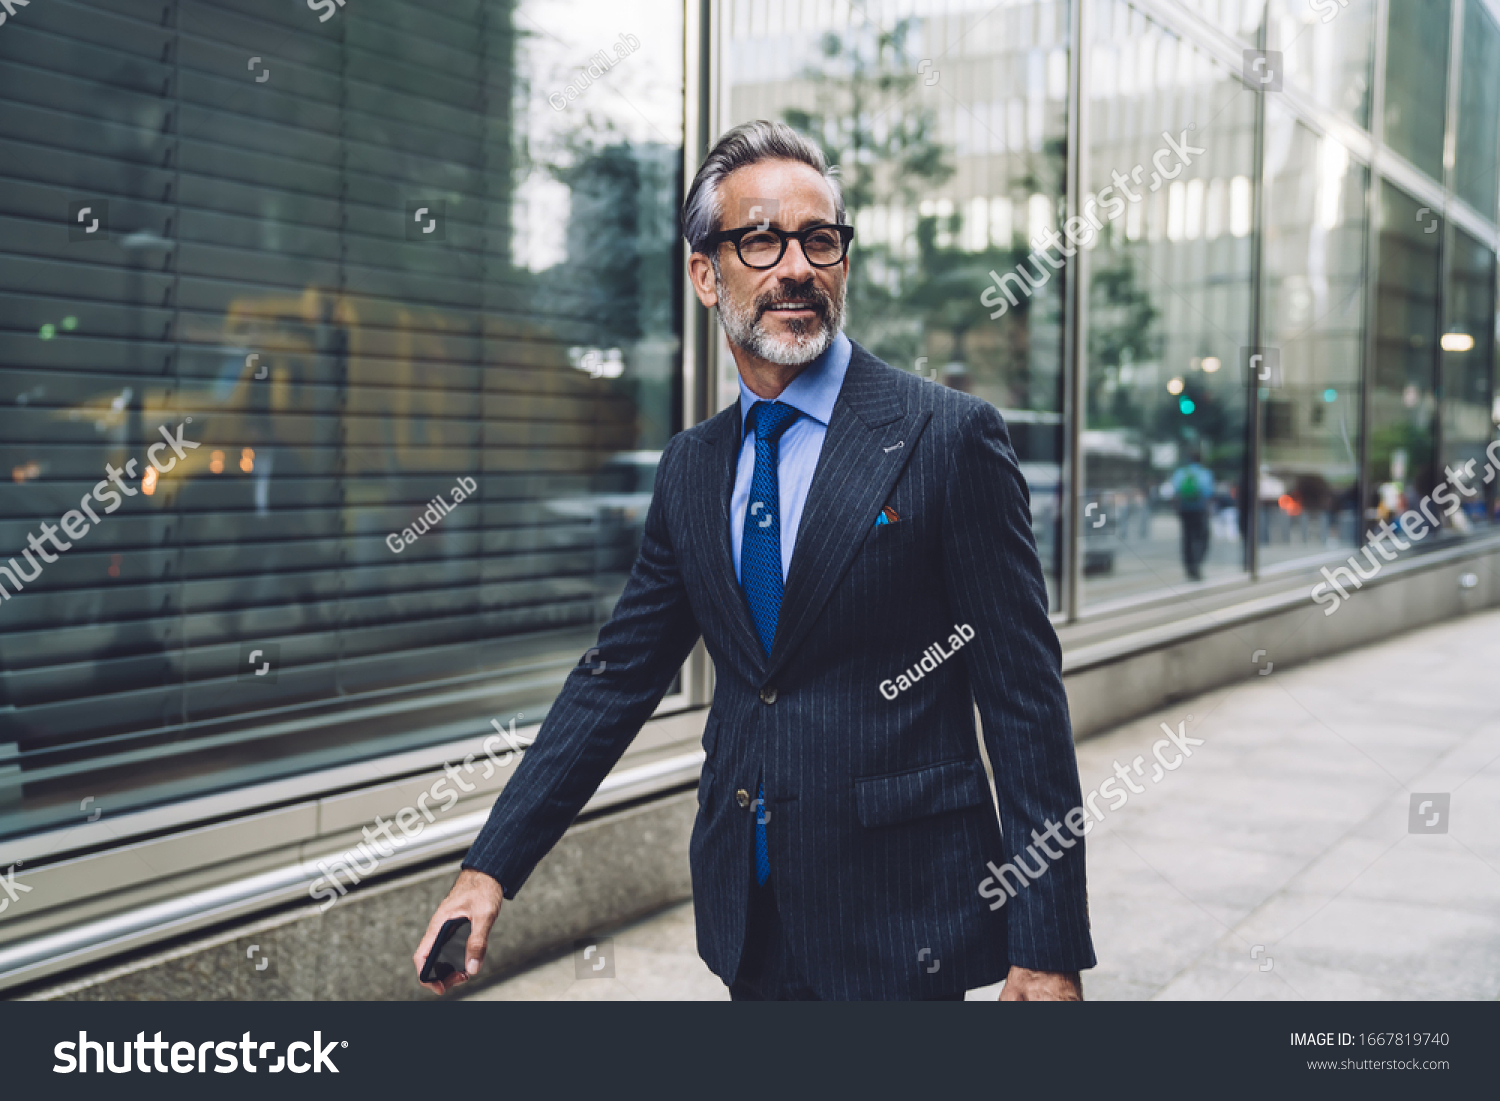 Successful elegant middle aged male executive in expensive suit walking purposefully on New York City street and turning head to side #1667819740